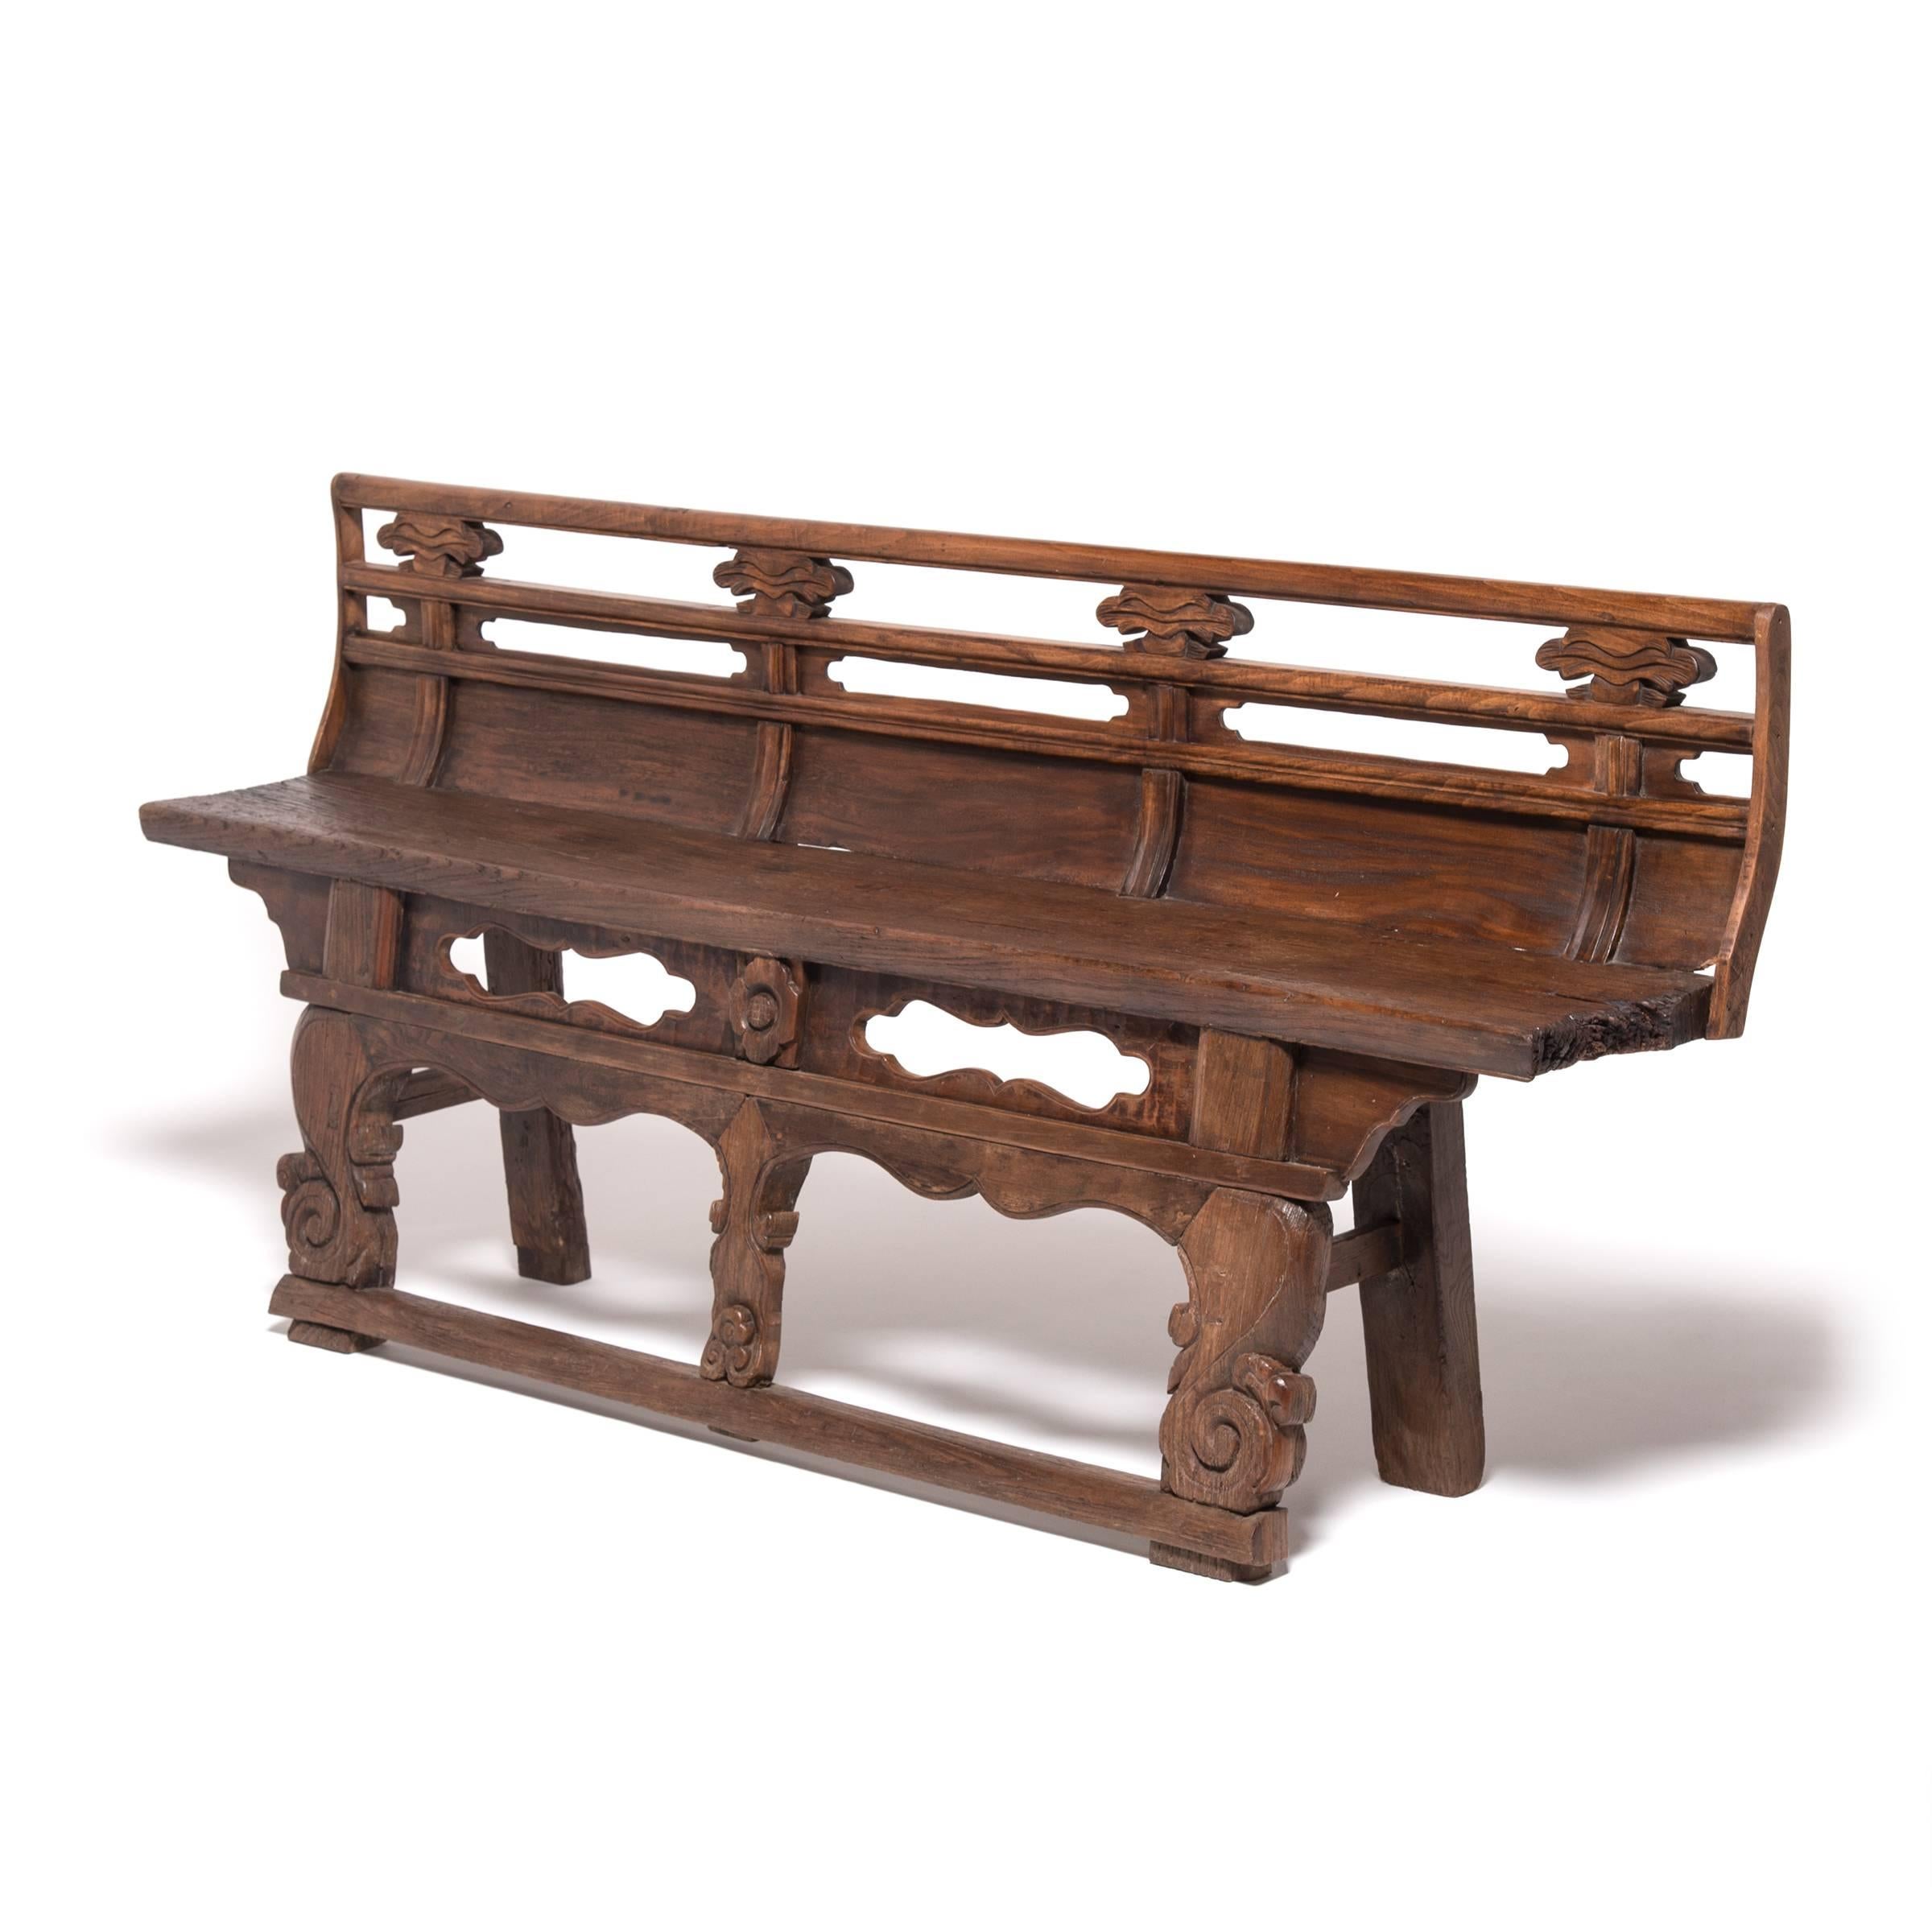 This 19th century village bench from China's Shanxi province is an exceptional example of Qing-dynasty craftsmanship. Unusual for its high back, built-in footrest, and ornate carved decorations, this bench was likely made for an opera house,